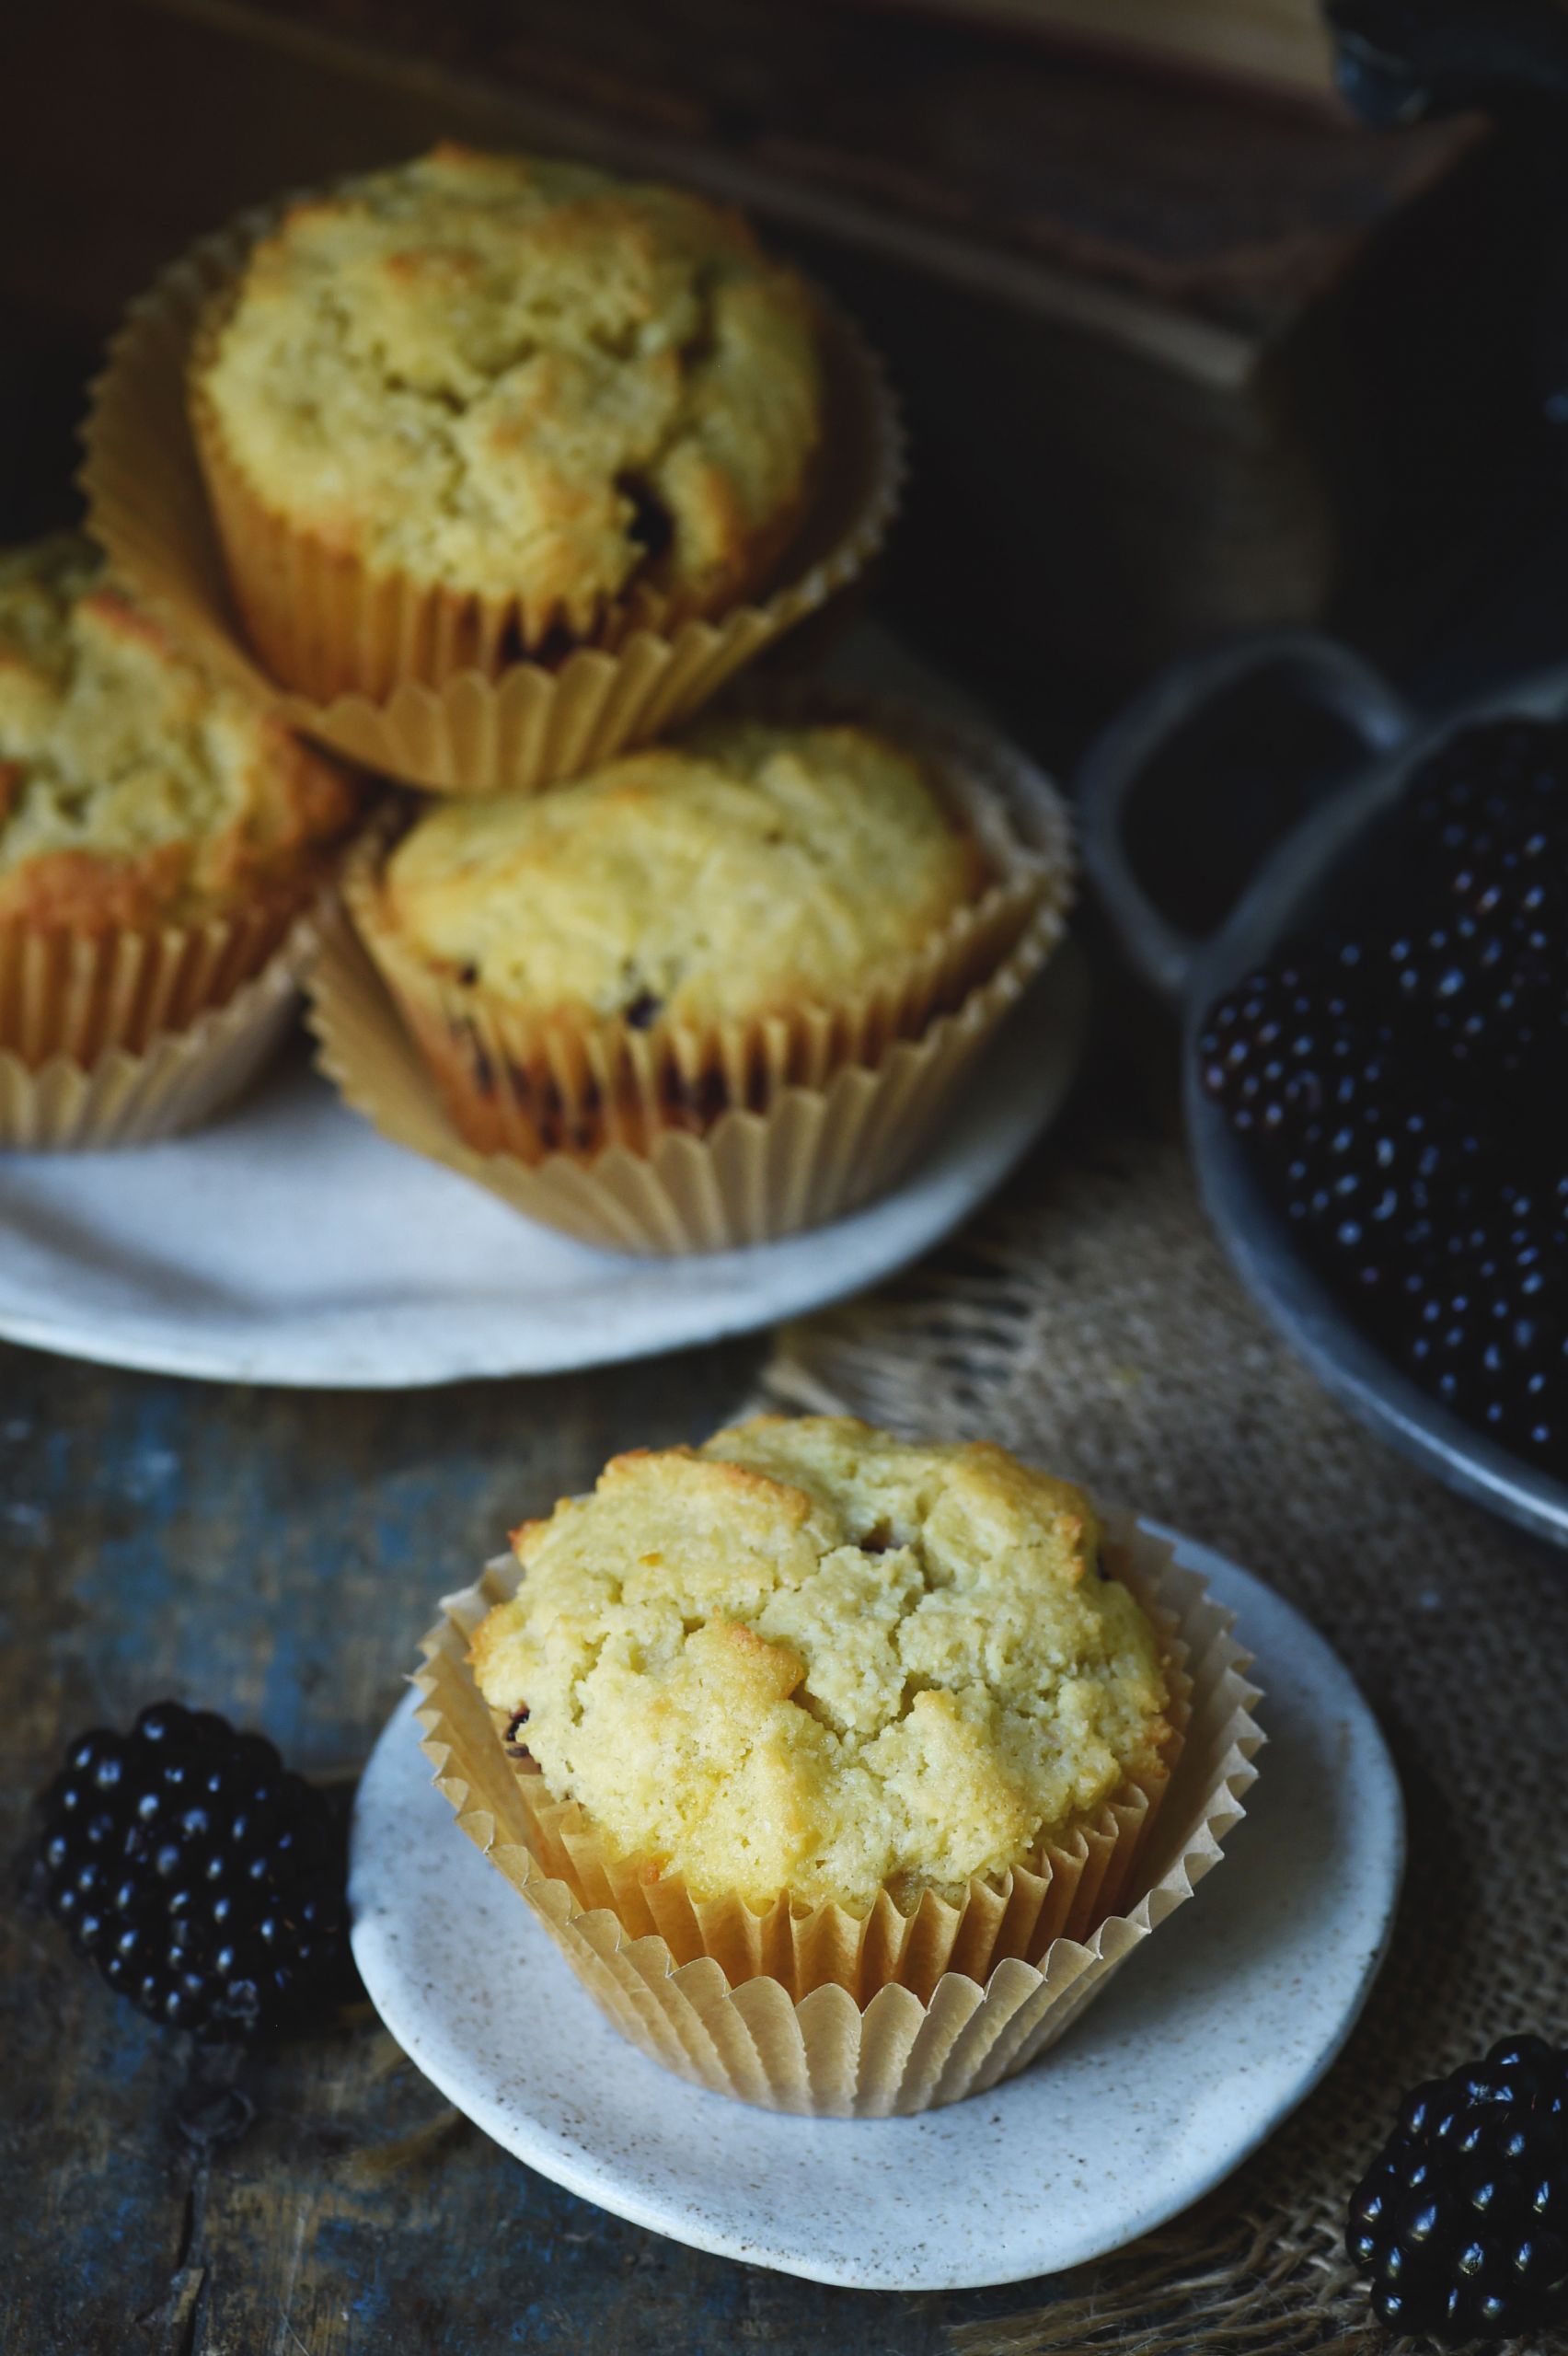 Low Carb Bread Almond Flour Muffin Recipes
 Low Carb Blackberry Filled Lemon Almond Flour Muffins